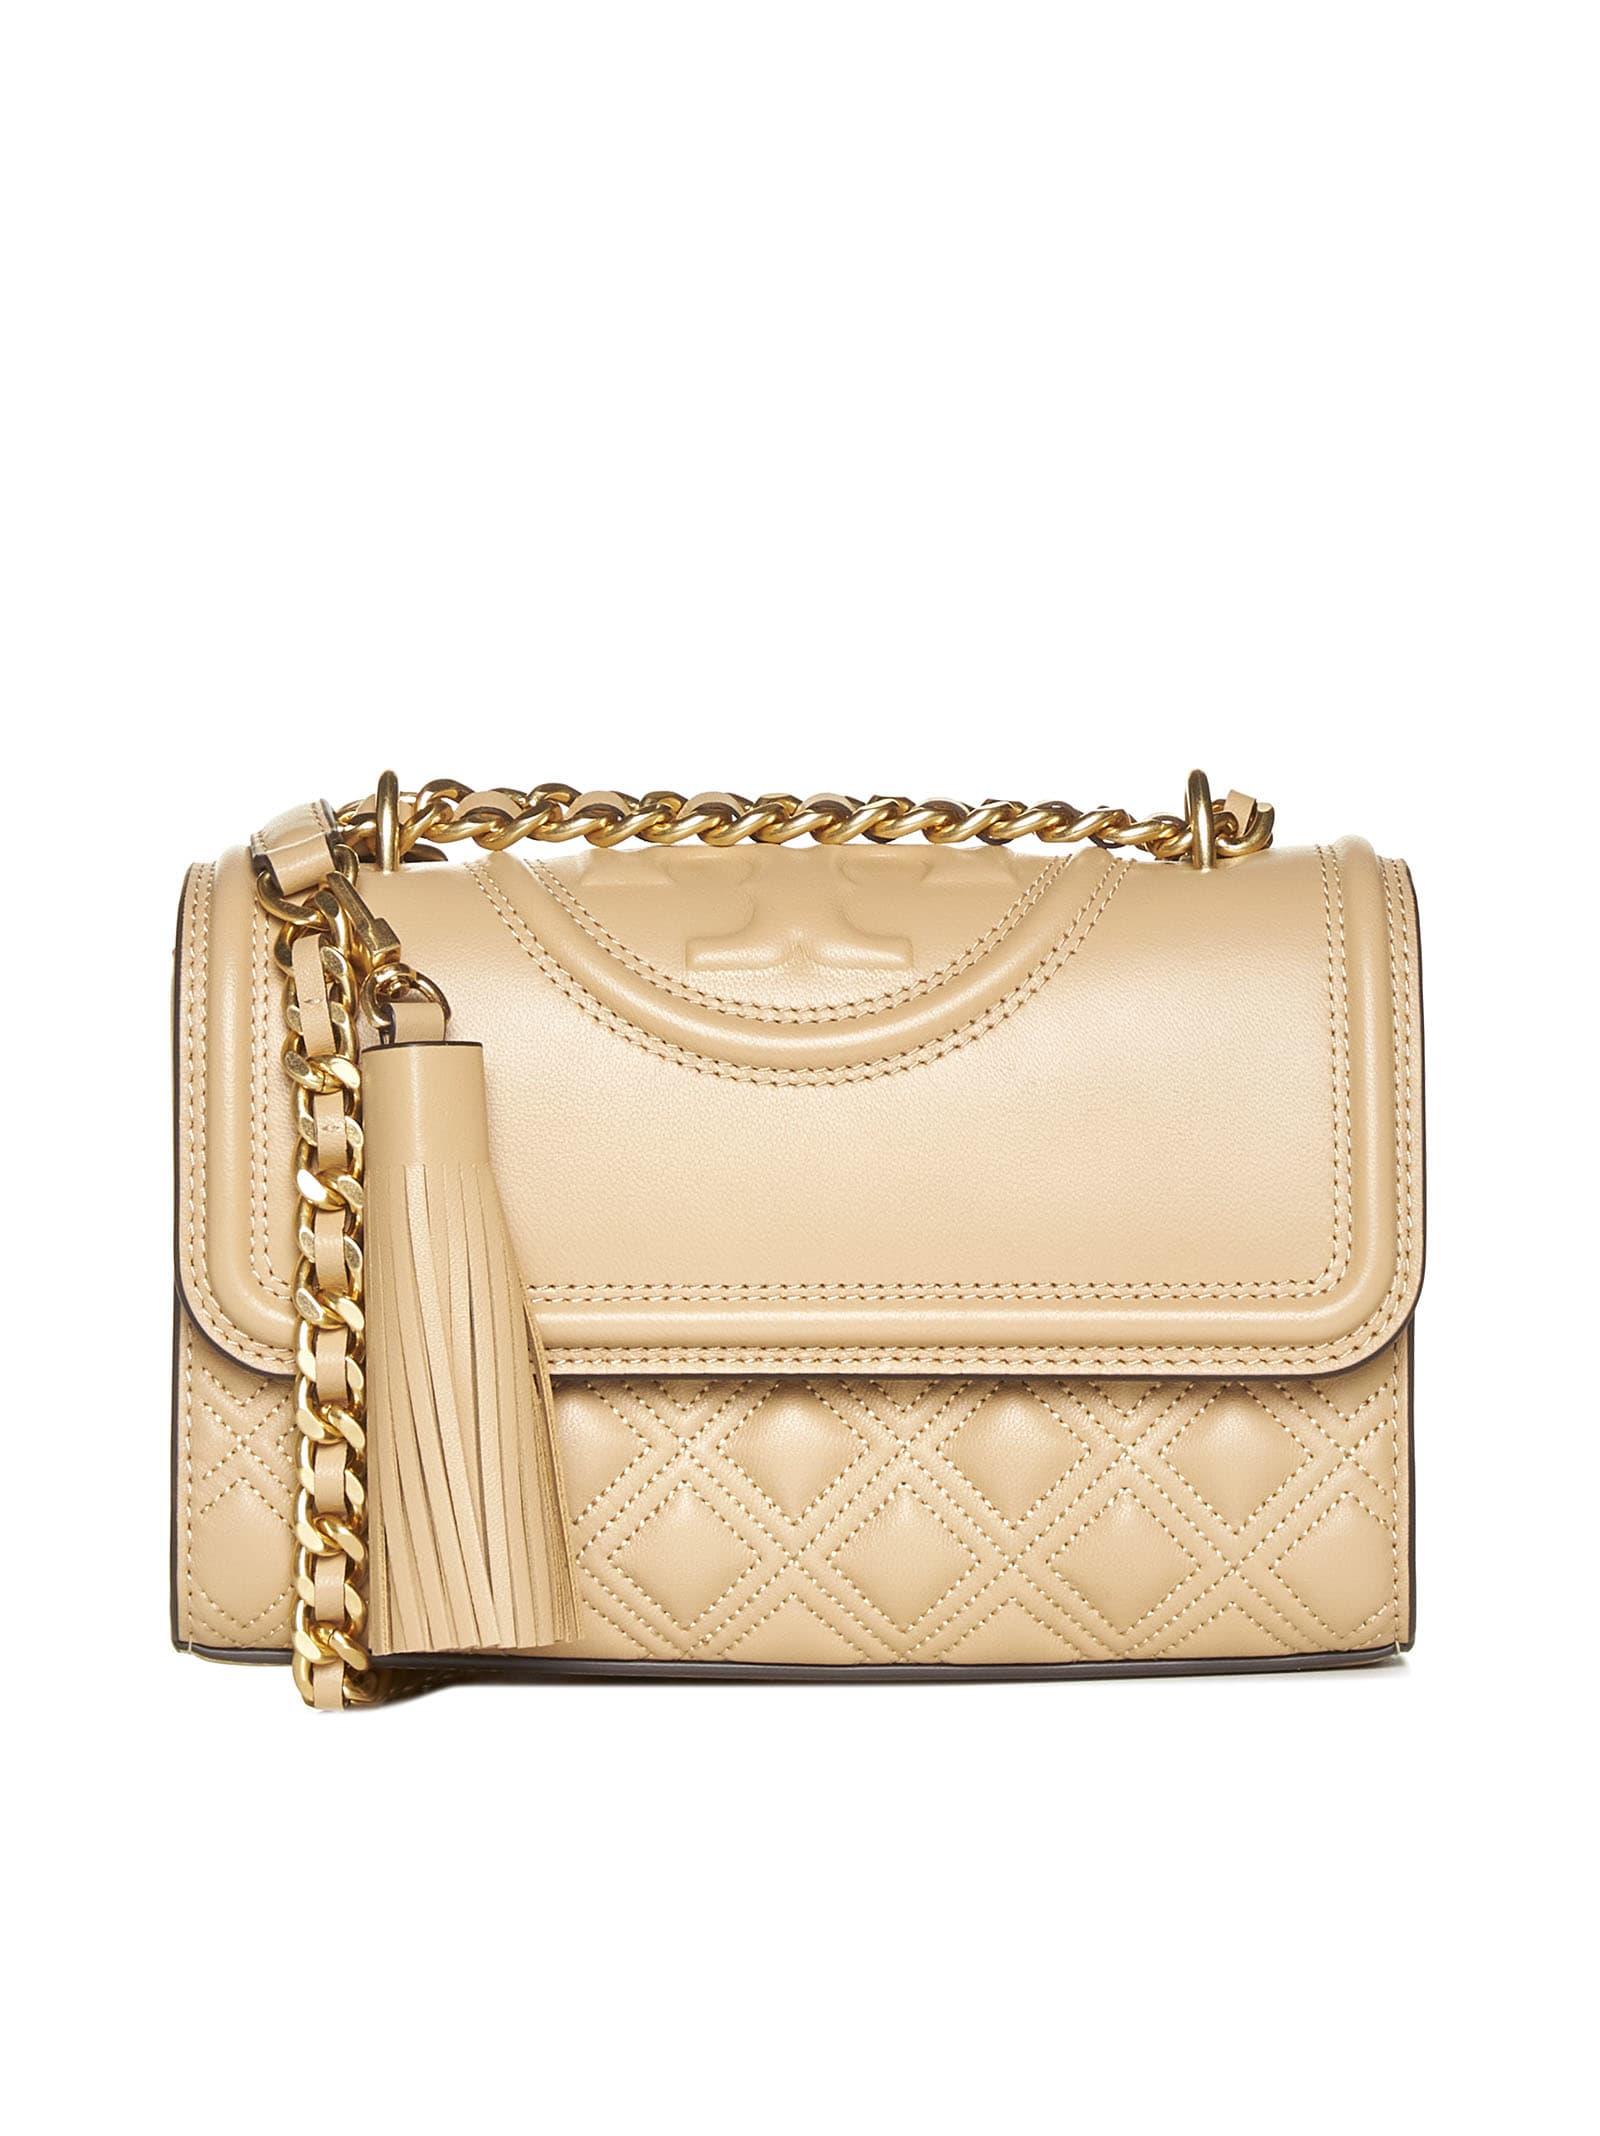 Tory Burch Fleming Small Convertible Leather Bag in Natural | Lyst